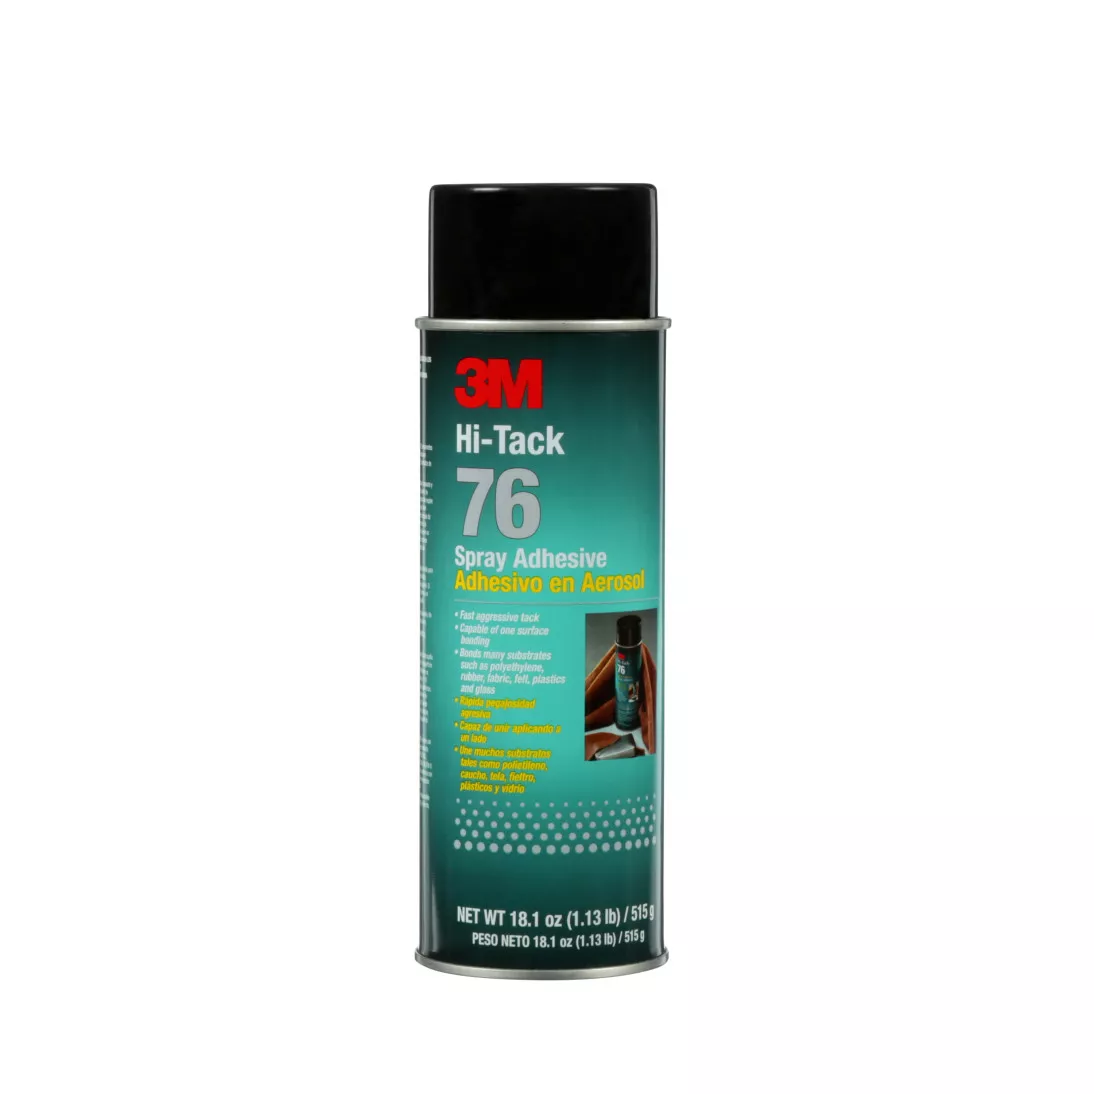 3M™ Hi-Tack Spray Adhesive 76, Clear, 24 fl oz Can (Net Wt 18.1 oz),
1/Case, Sample, NOT FOR SALE IN CA AND OTHER STATES